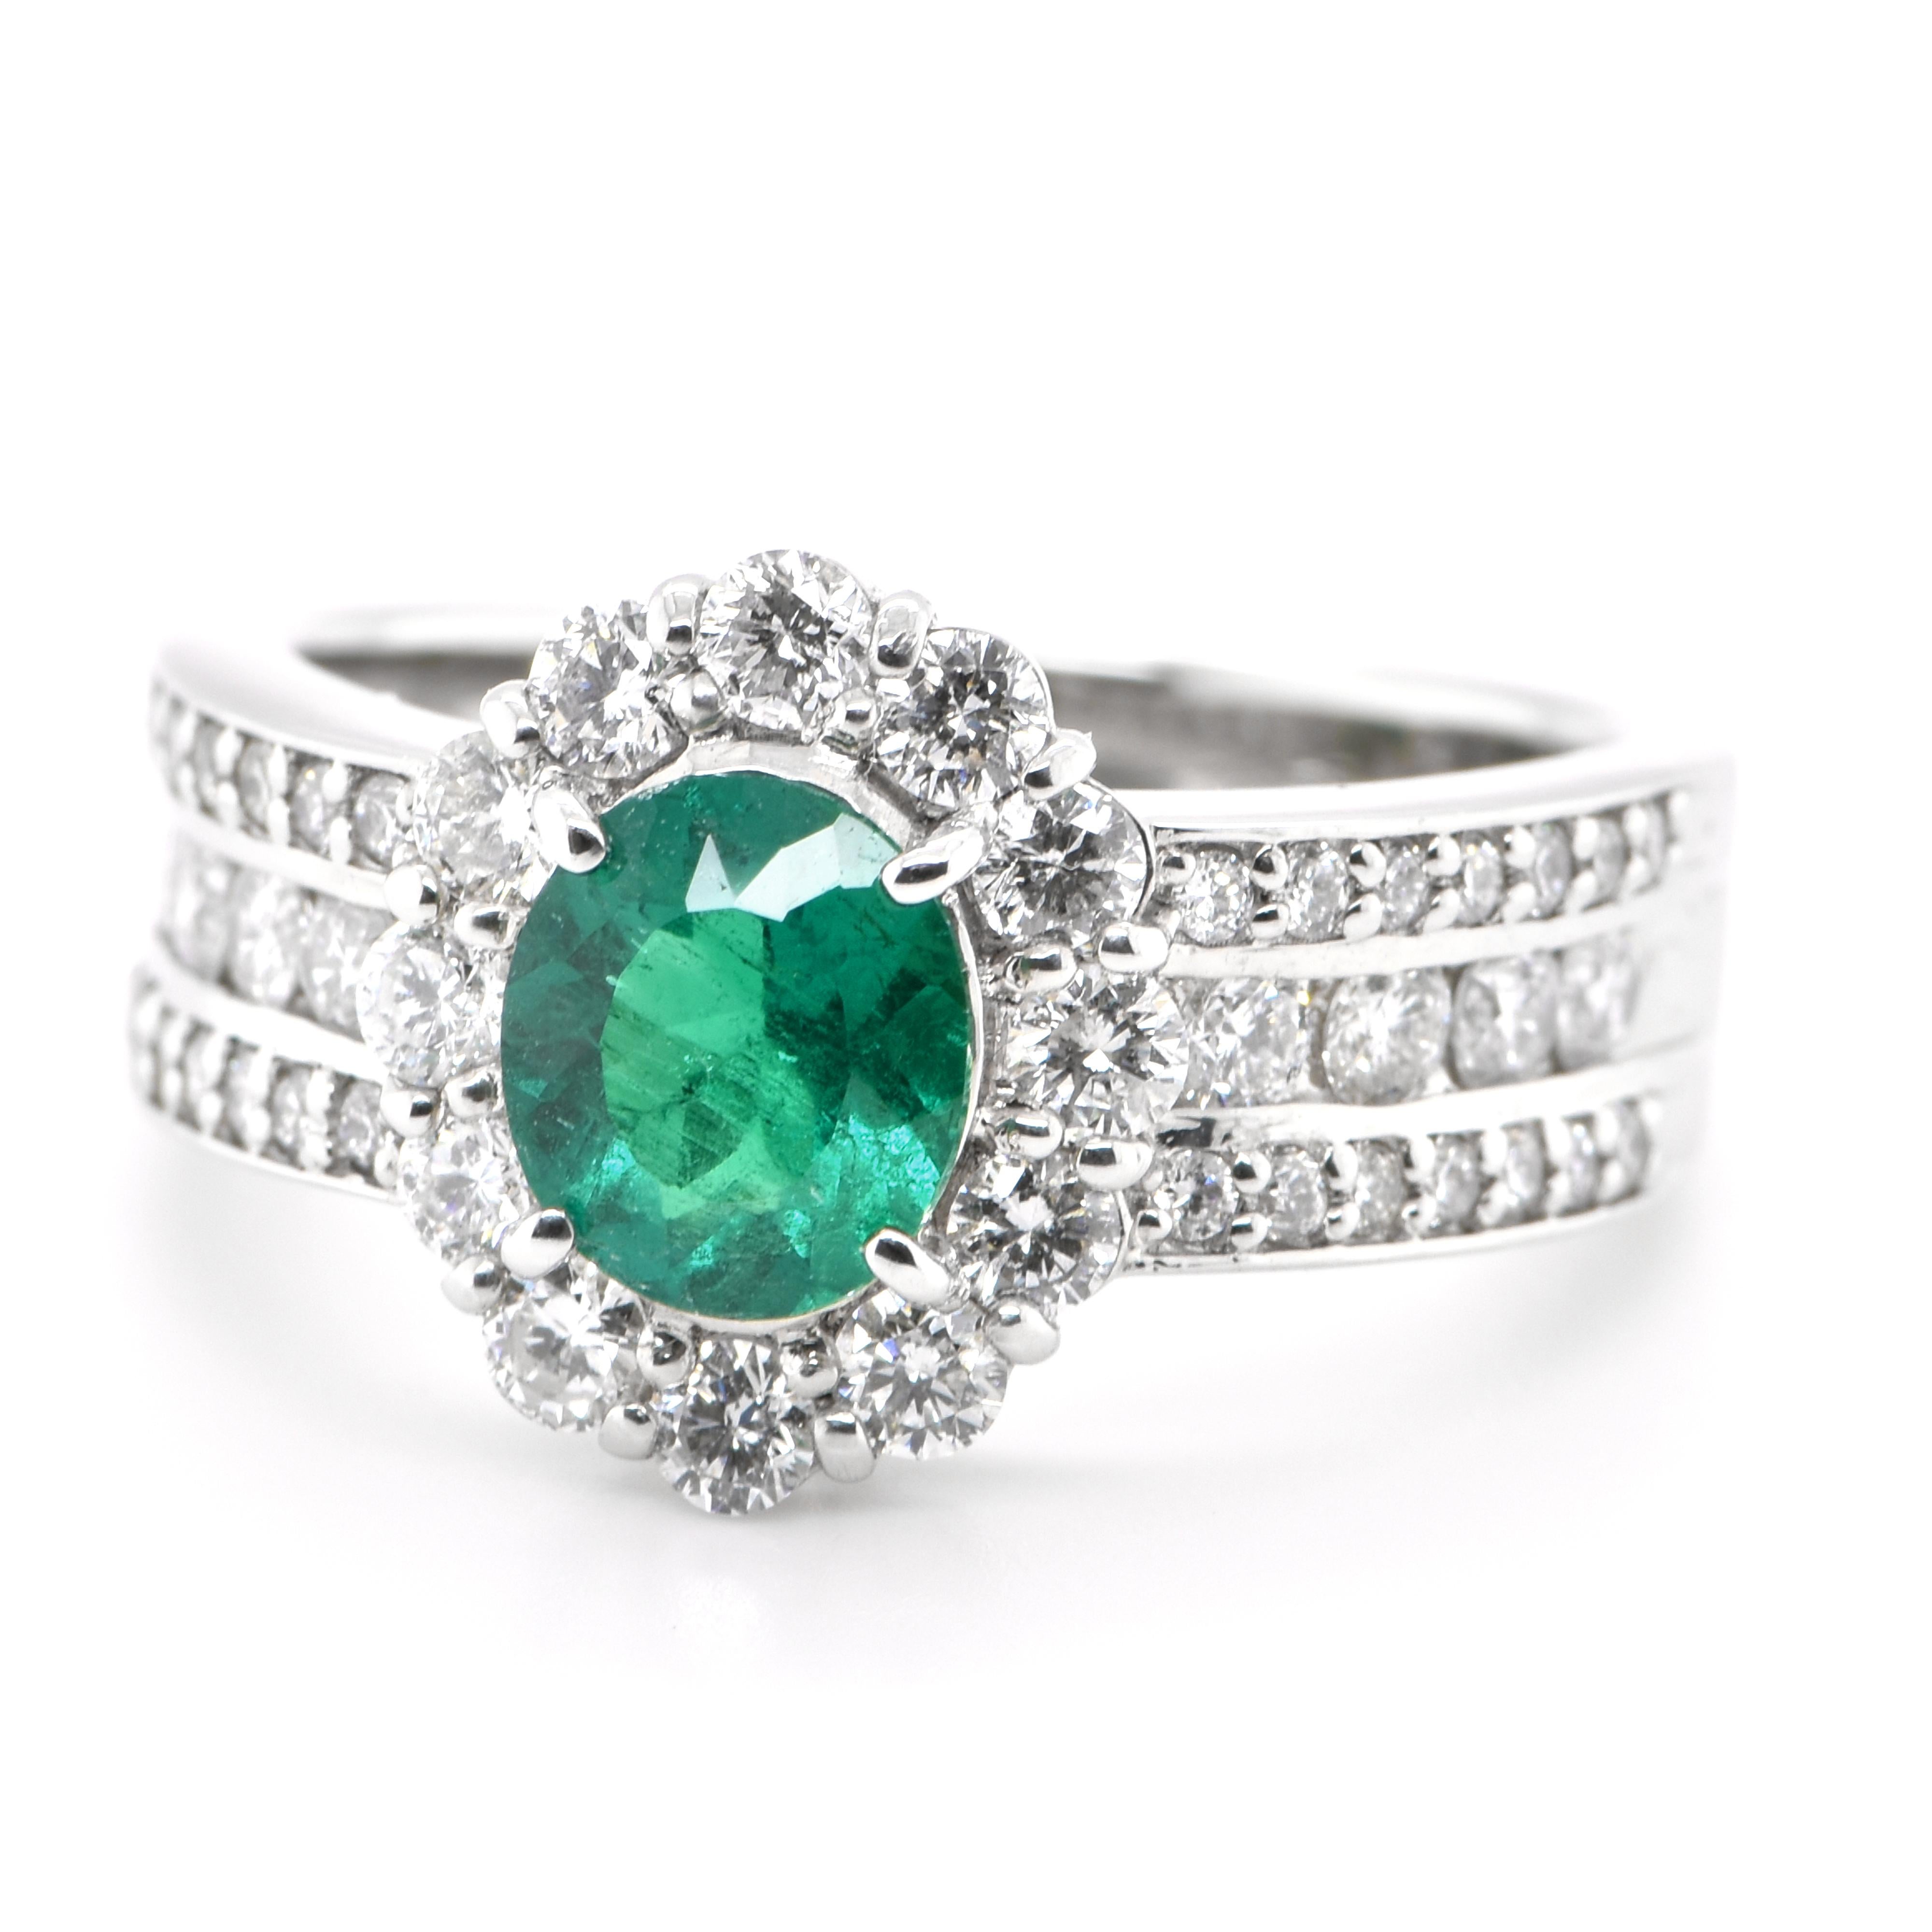 A stunning ring featuring a JGGL Certified 0.74 Carat Natural Untreated/Non-Oil Emerald and 1.00 Carats of Diamond Accents set in Platinum. People have admired emerald’s green for thousands of years. Emeralds have always been associated with the